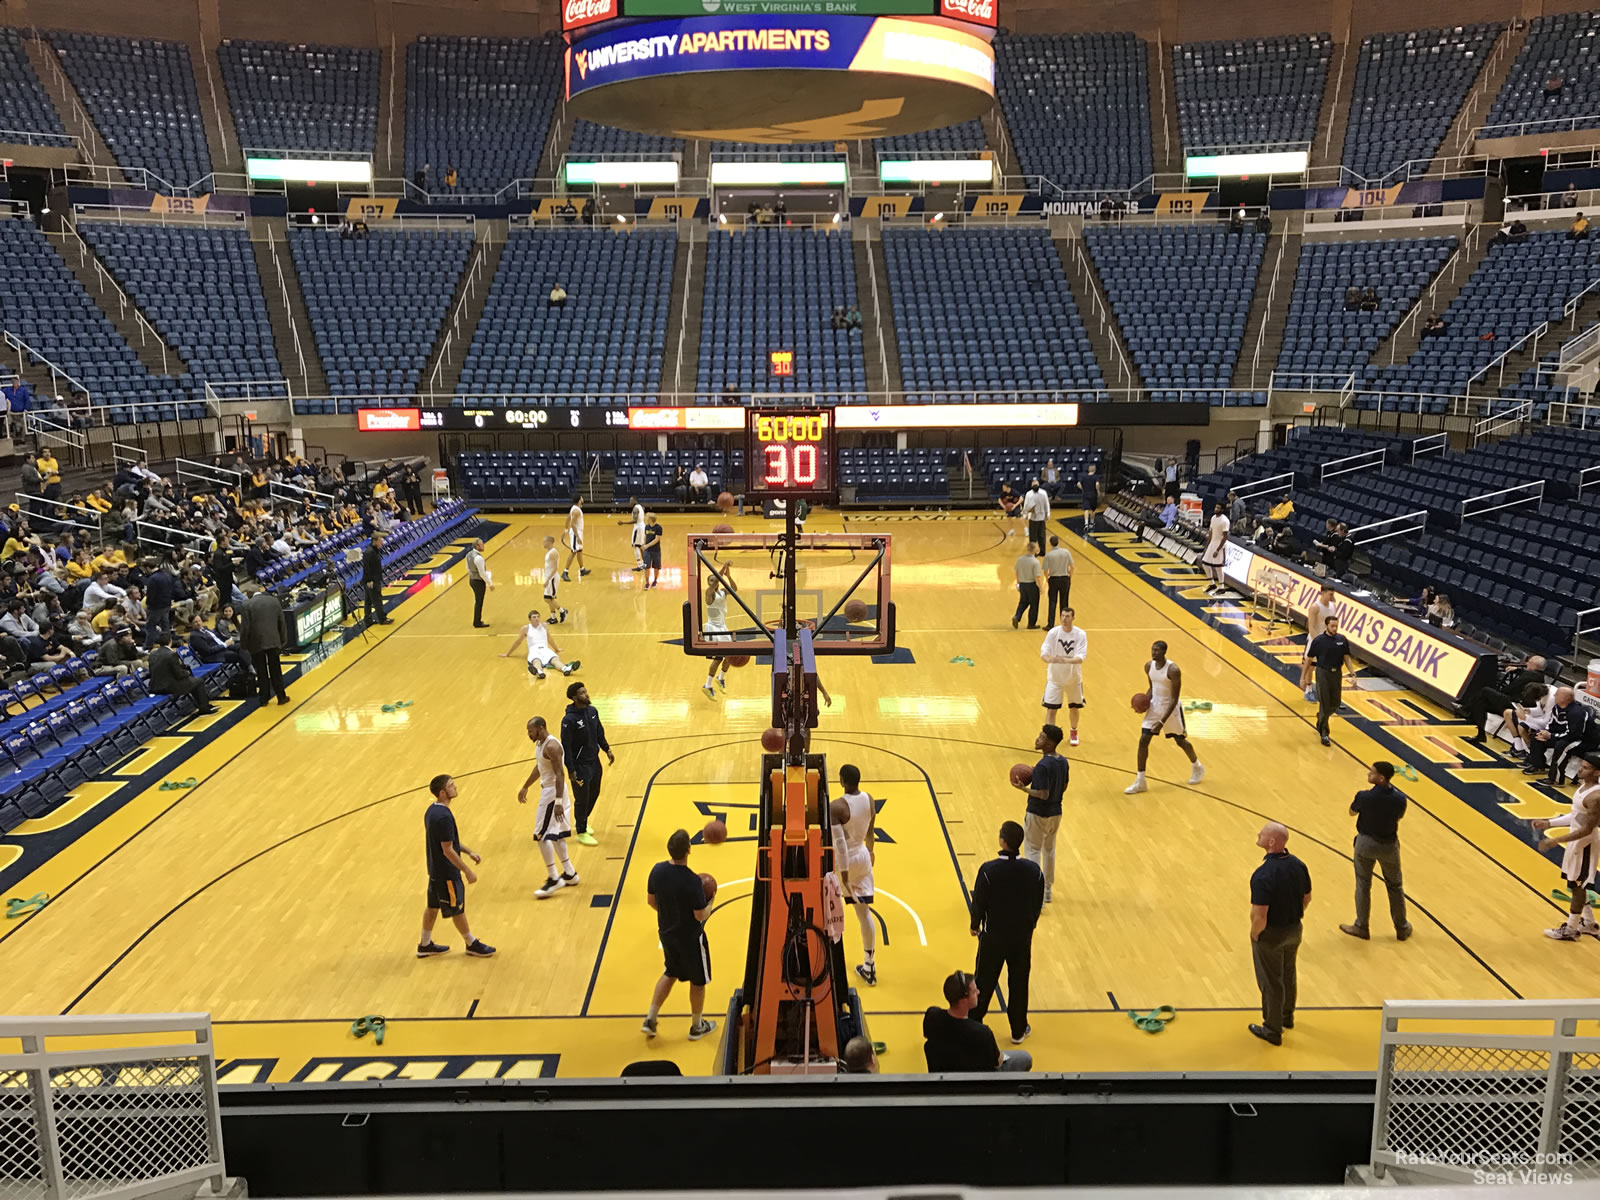 West Virginia Basketball Arena Seating Chart